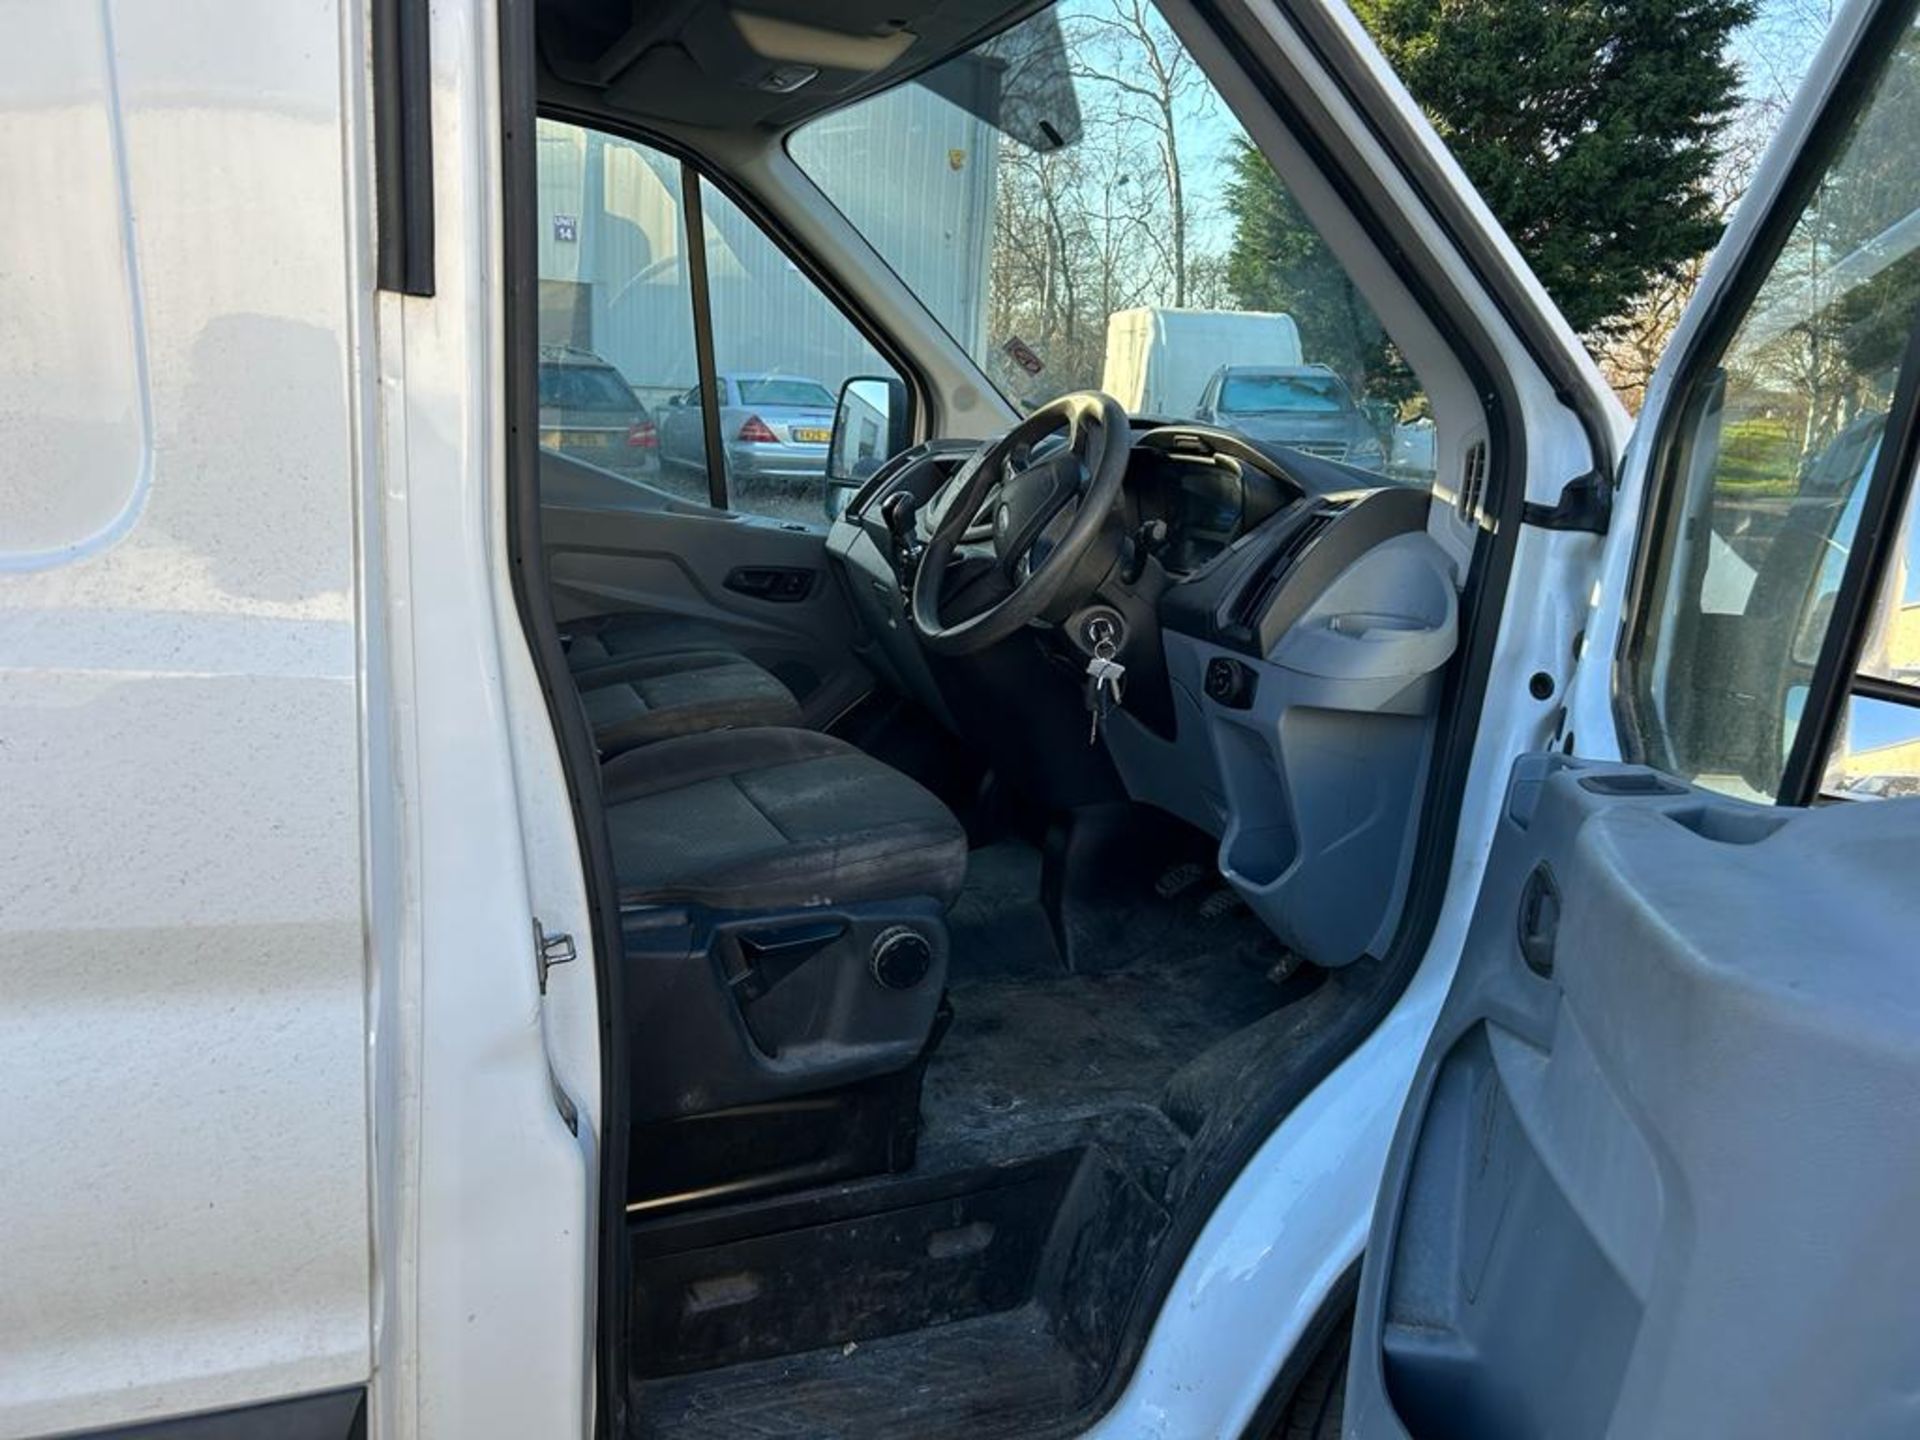 2019 19 FORD TRANSIT 350 PANEL VAN - L3 H3 - 102K MILES - PLY LINED - Image 8 of 11